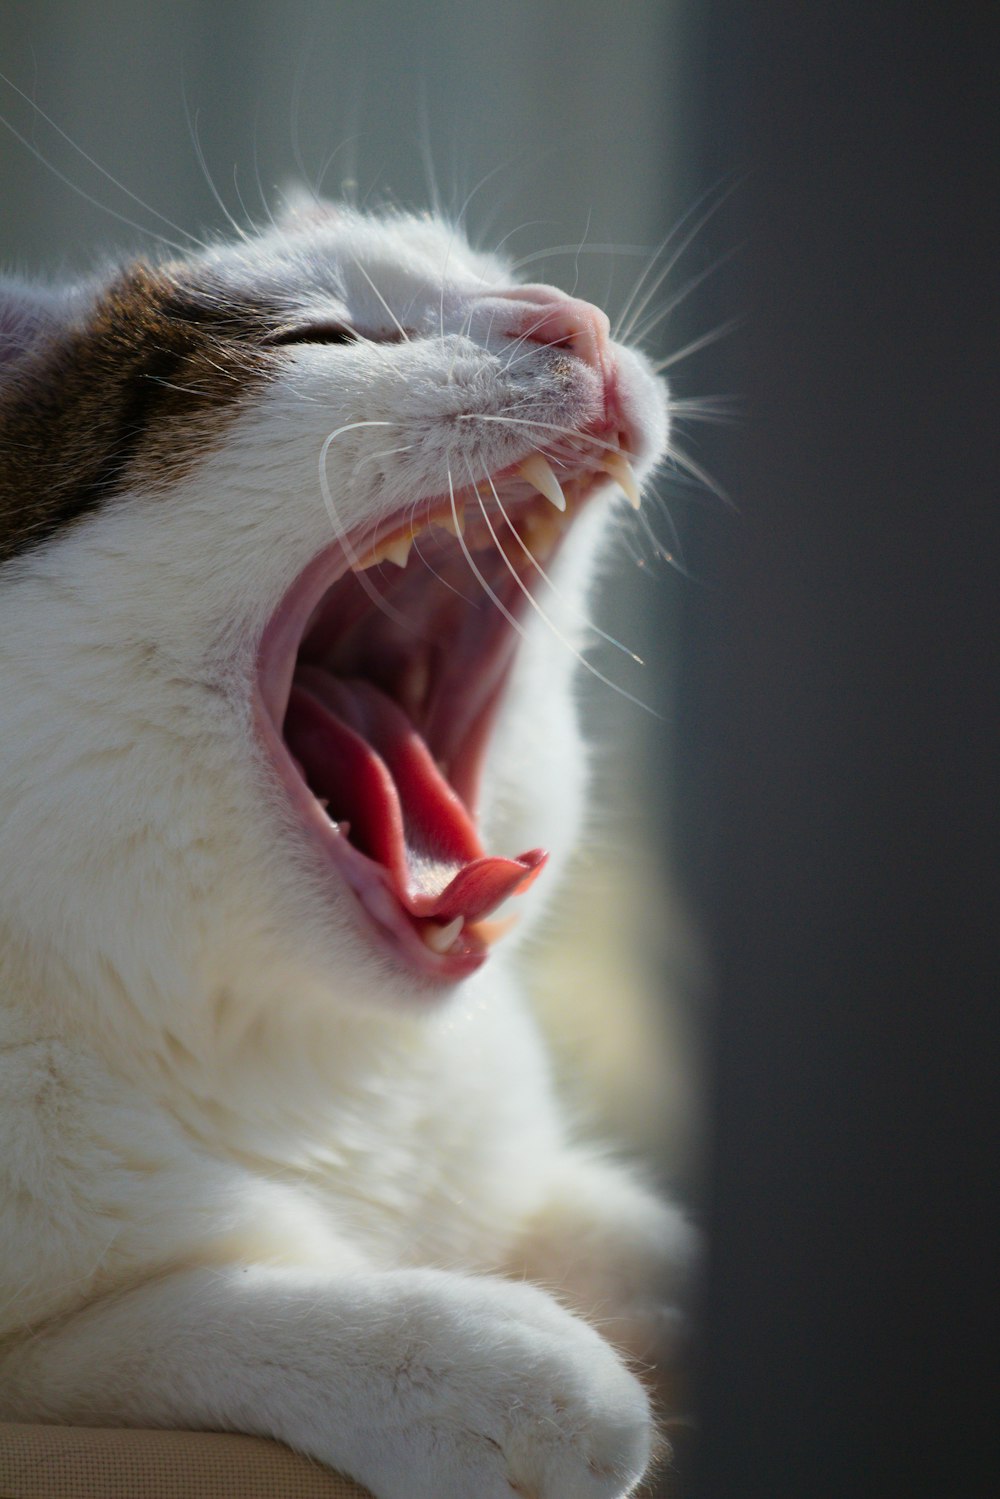 a cat yawning with its mouth wide open